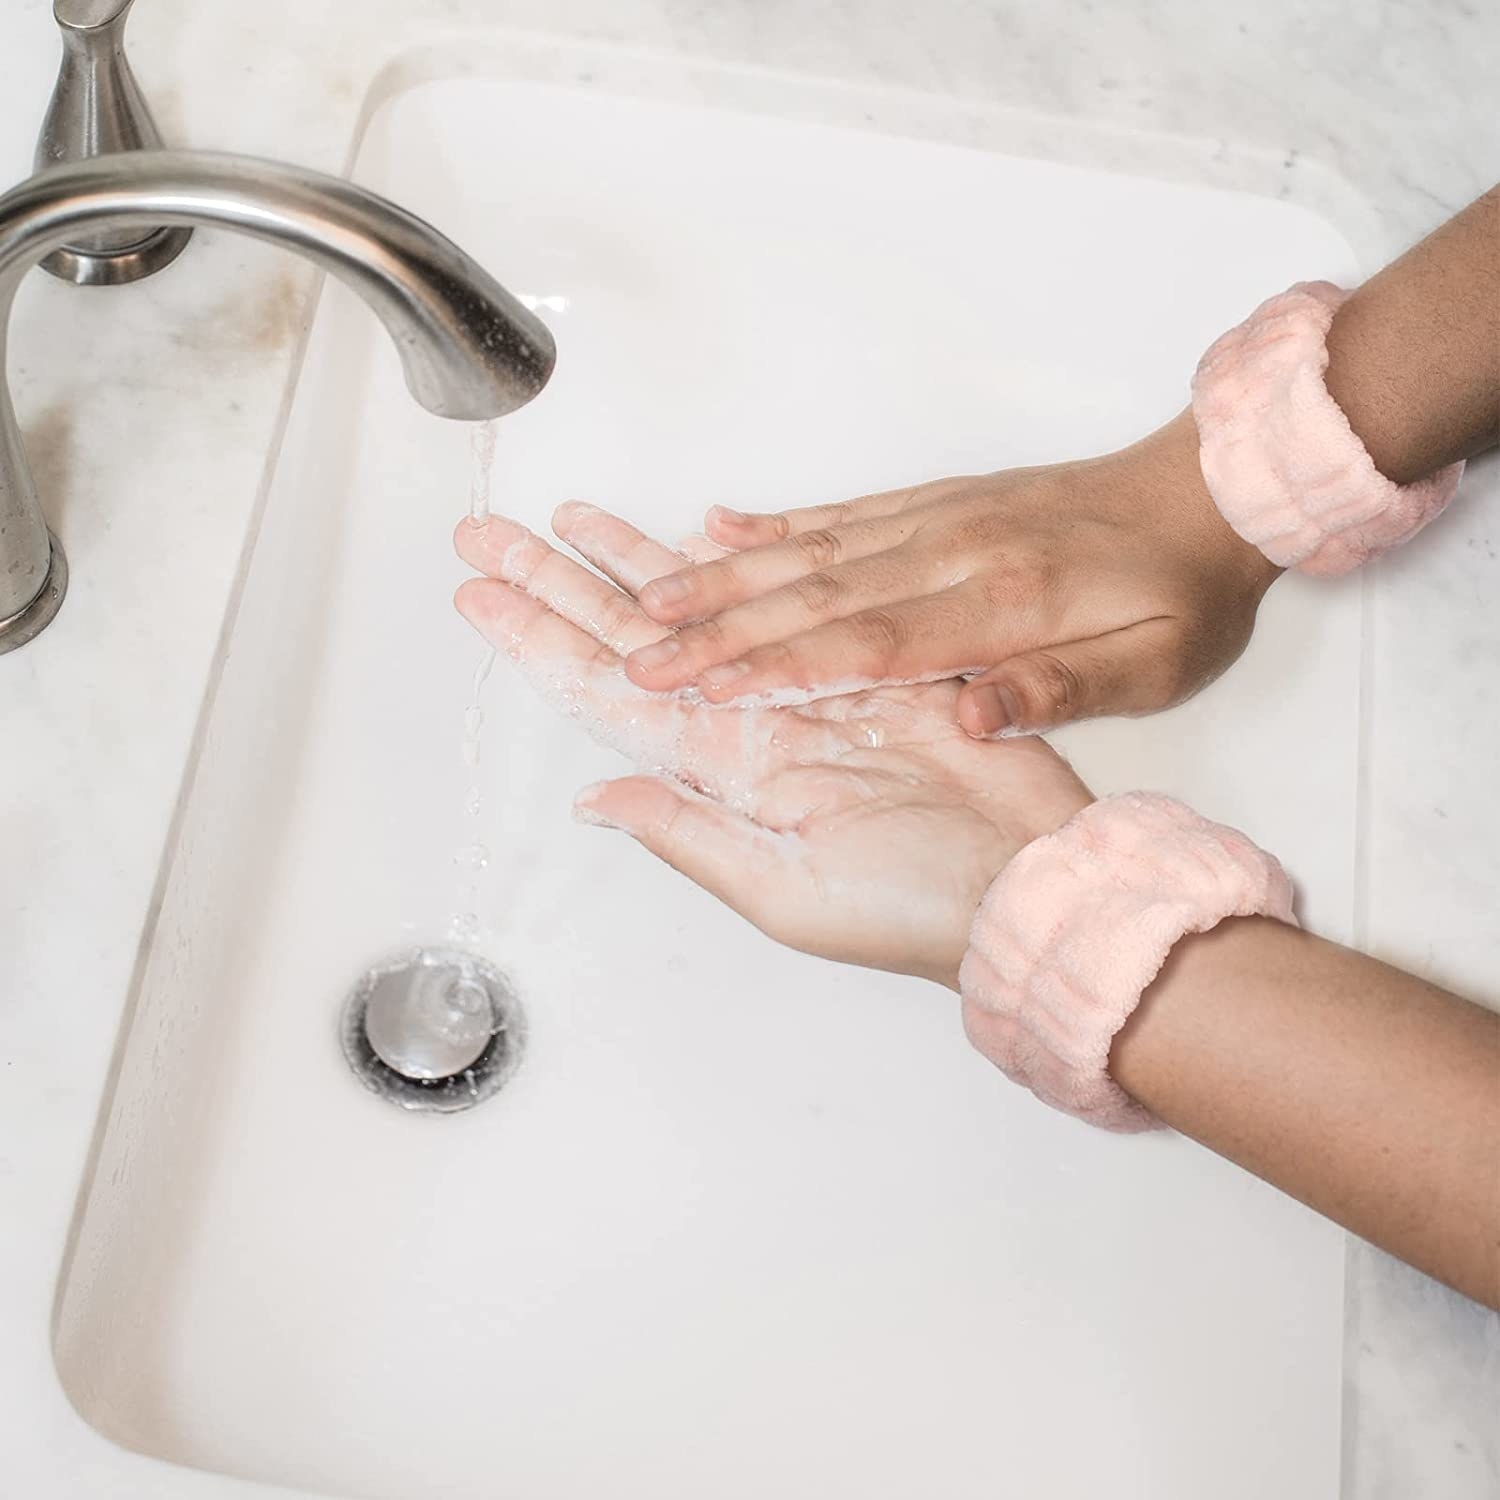 A person wearing the wristbands while washing their hands over a sink